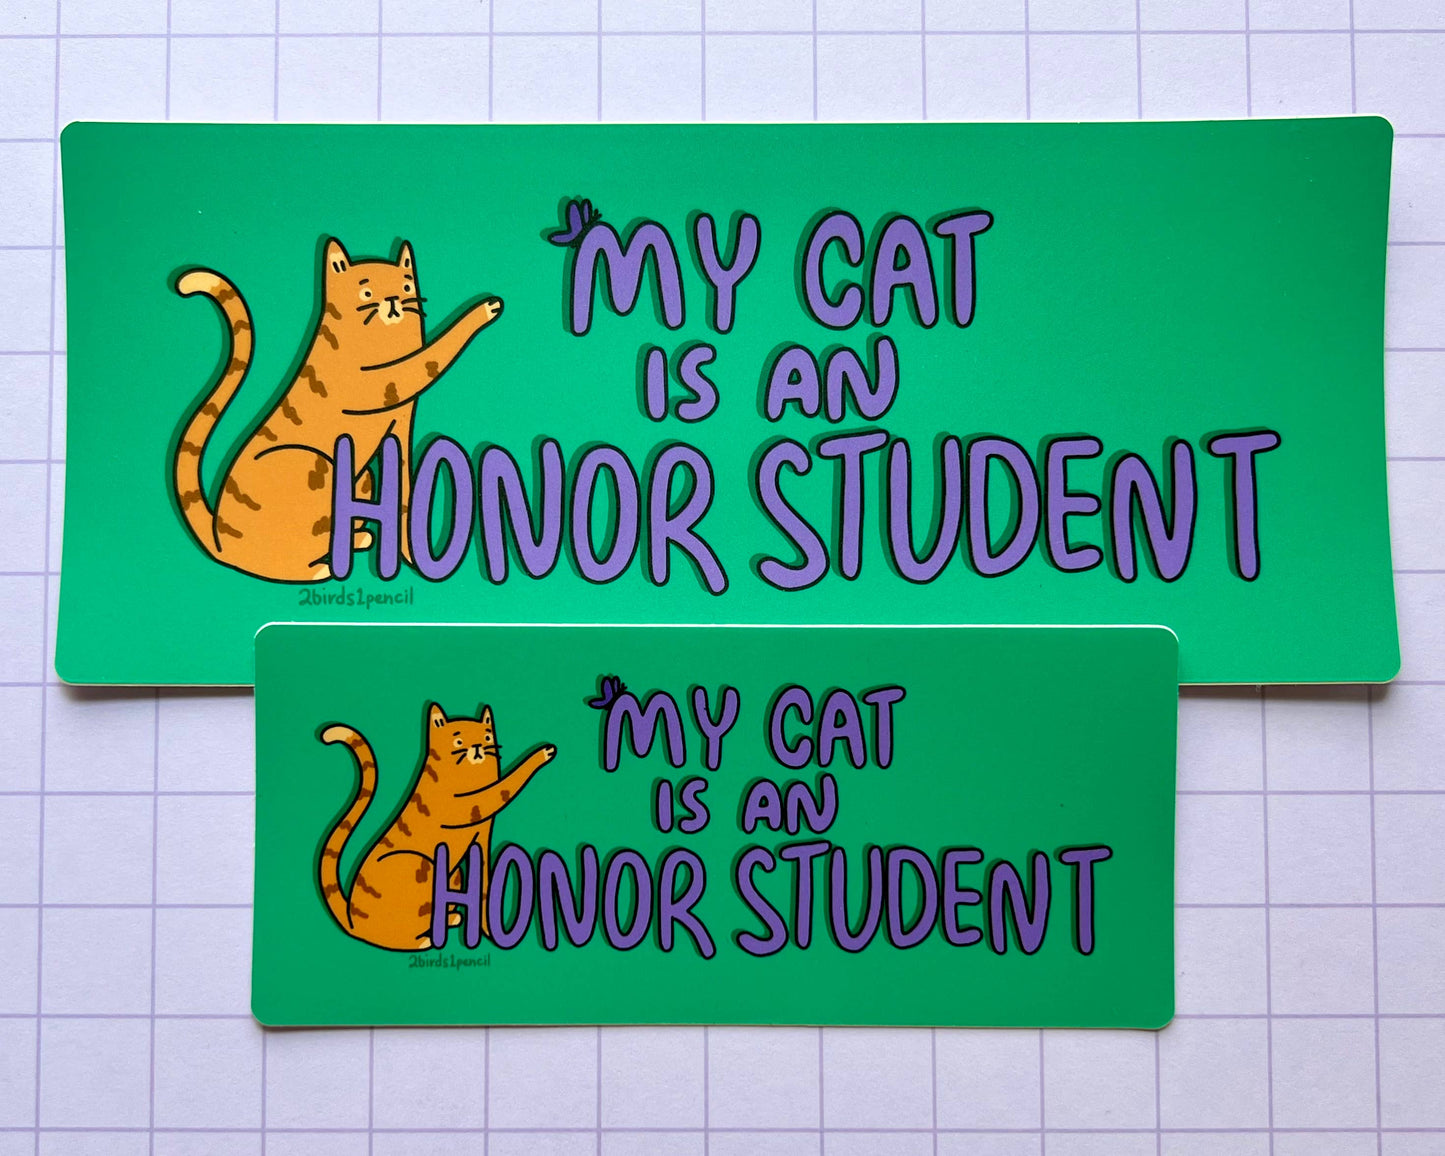 "My Cat is an Honor Student" Bumper Sticker